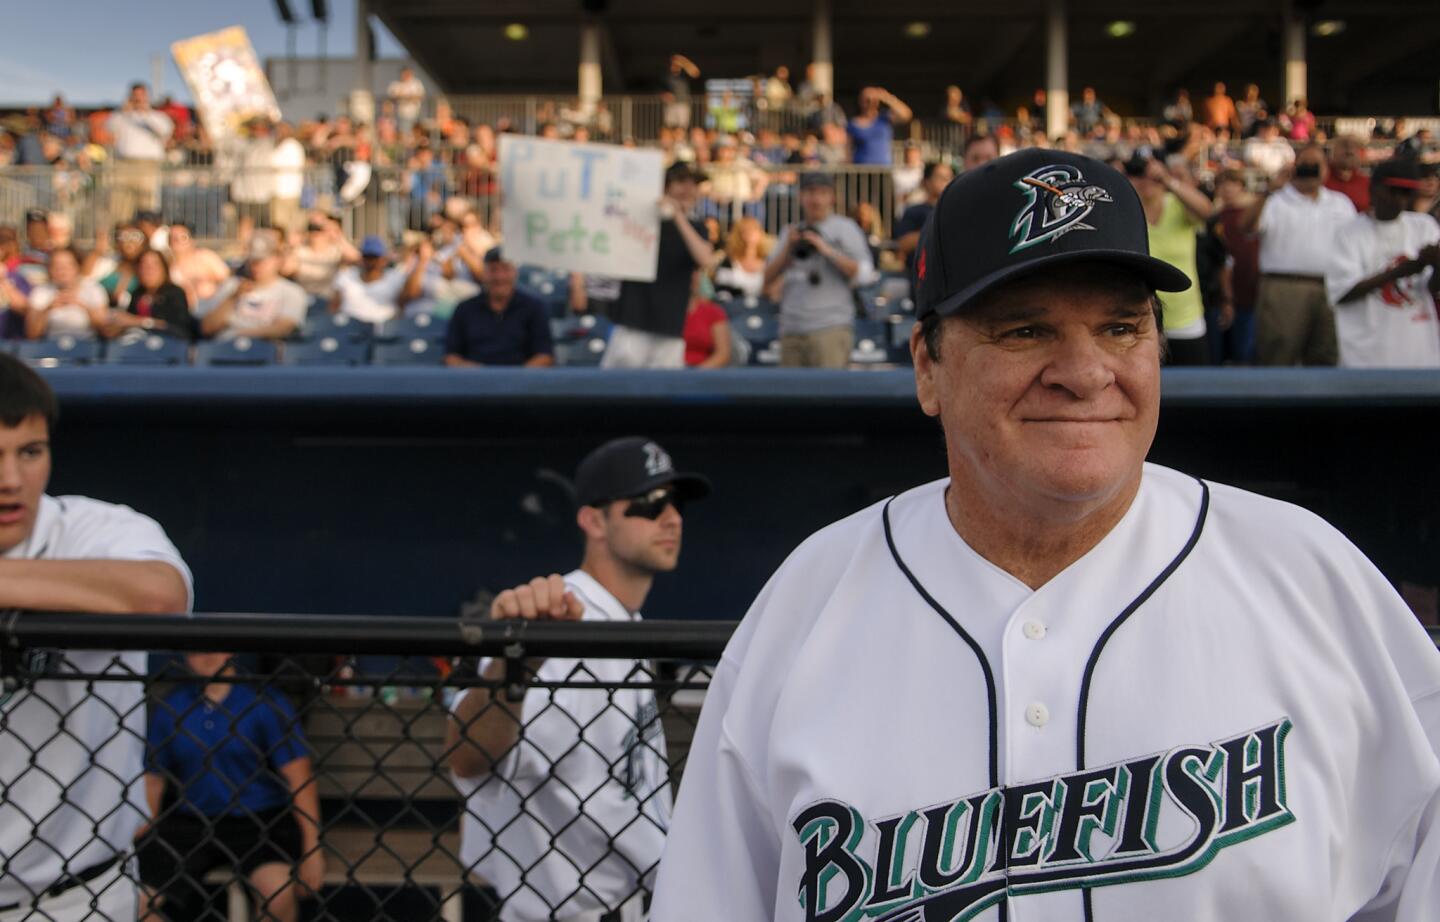 Baseball great Pete Rose, 73, looks out over the Bridgeport Bluefish diamond as his team takes the field.